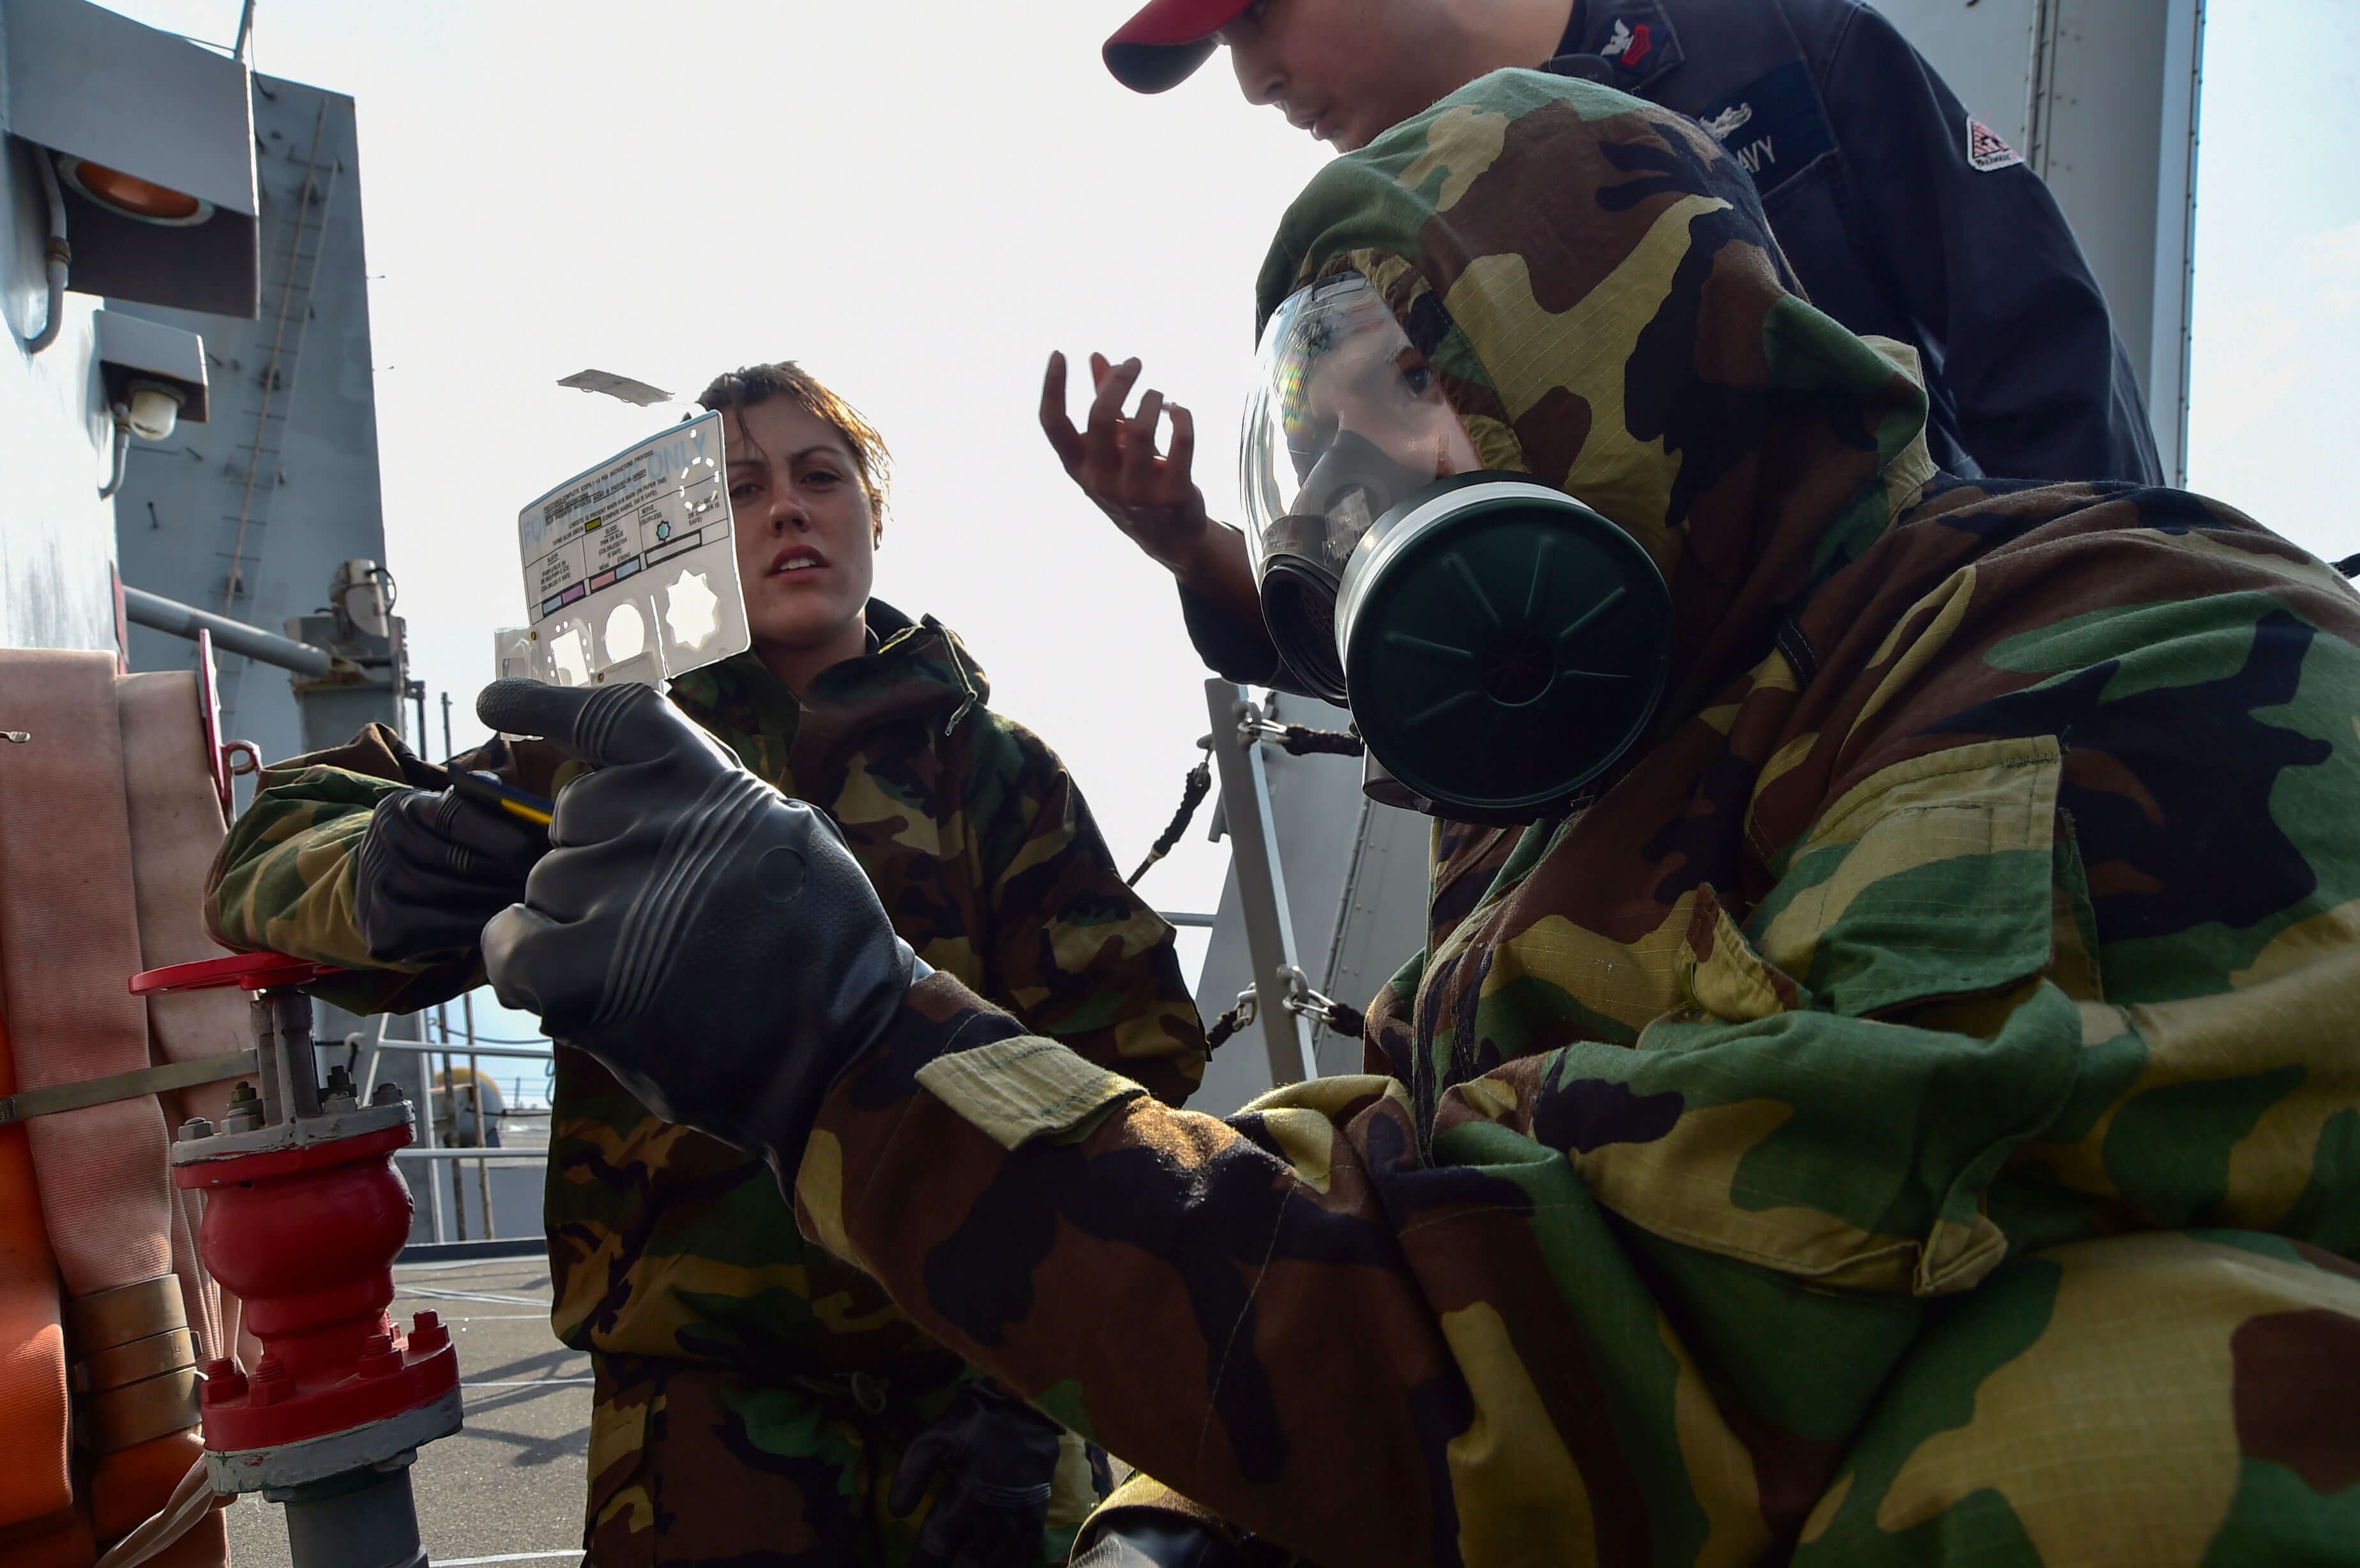 US sailors conduct a test for simulated agent during a chemical, biological and radiological training event in the Gulf of Oman, 2015. © Naval Surface Warriors / Flickr